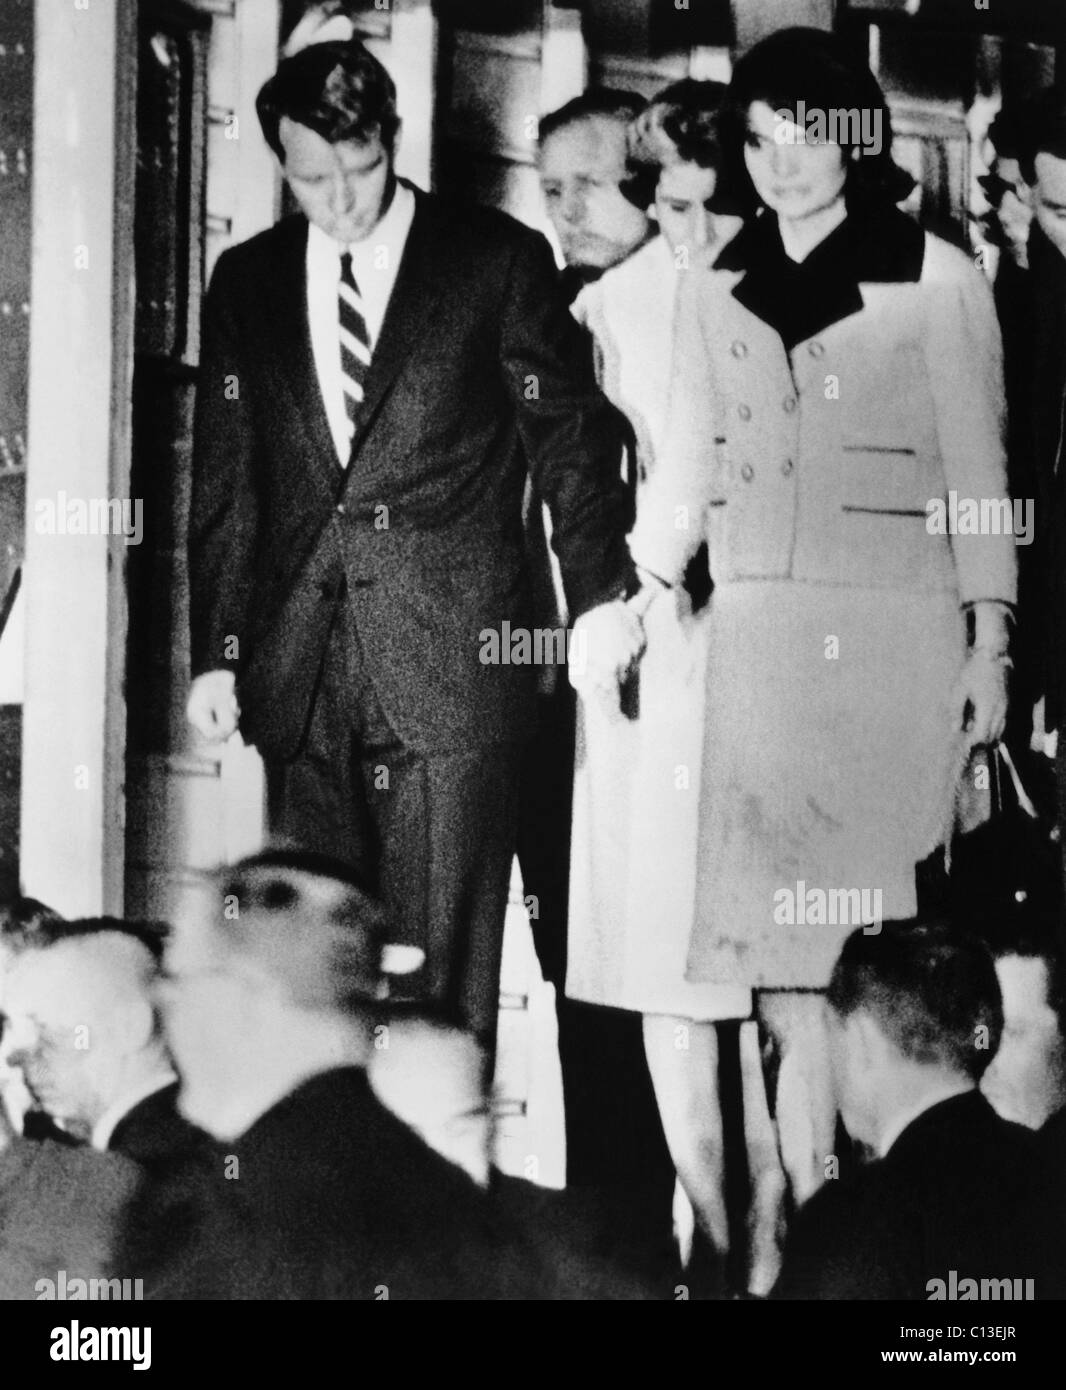 From left, Robert Kennedy, Jacqueline Kennedy, after the asassination of President John Kennedy, November 22, 1963 Stock Photo